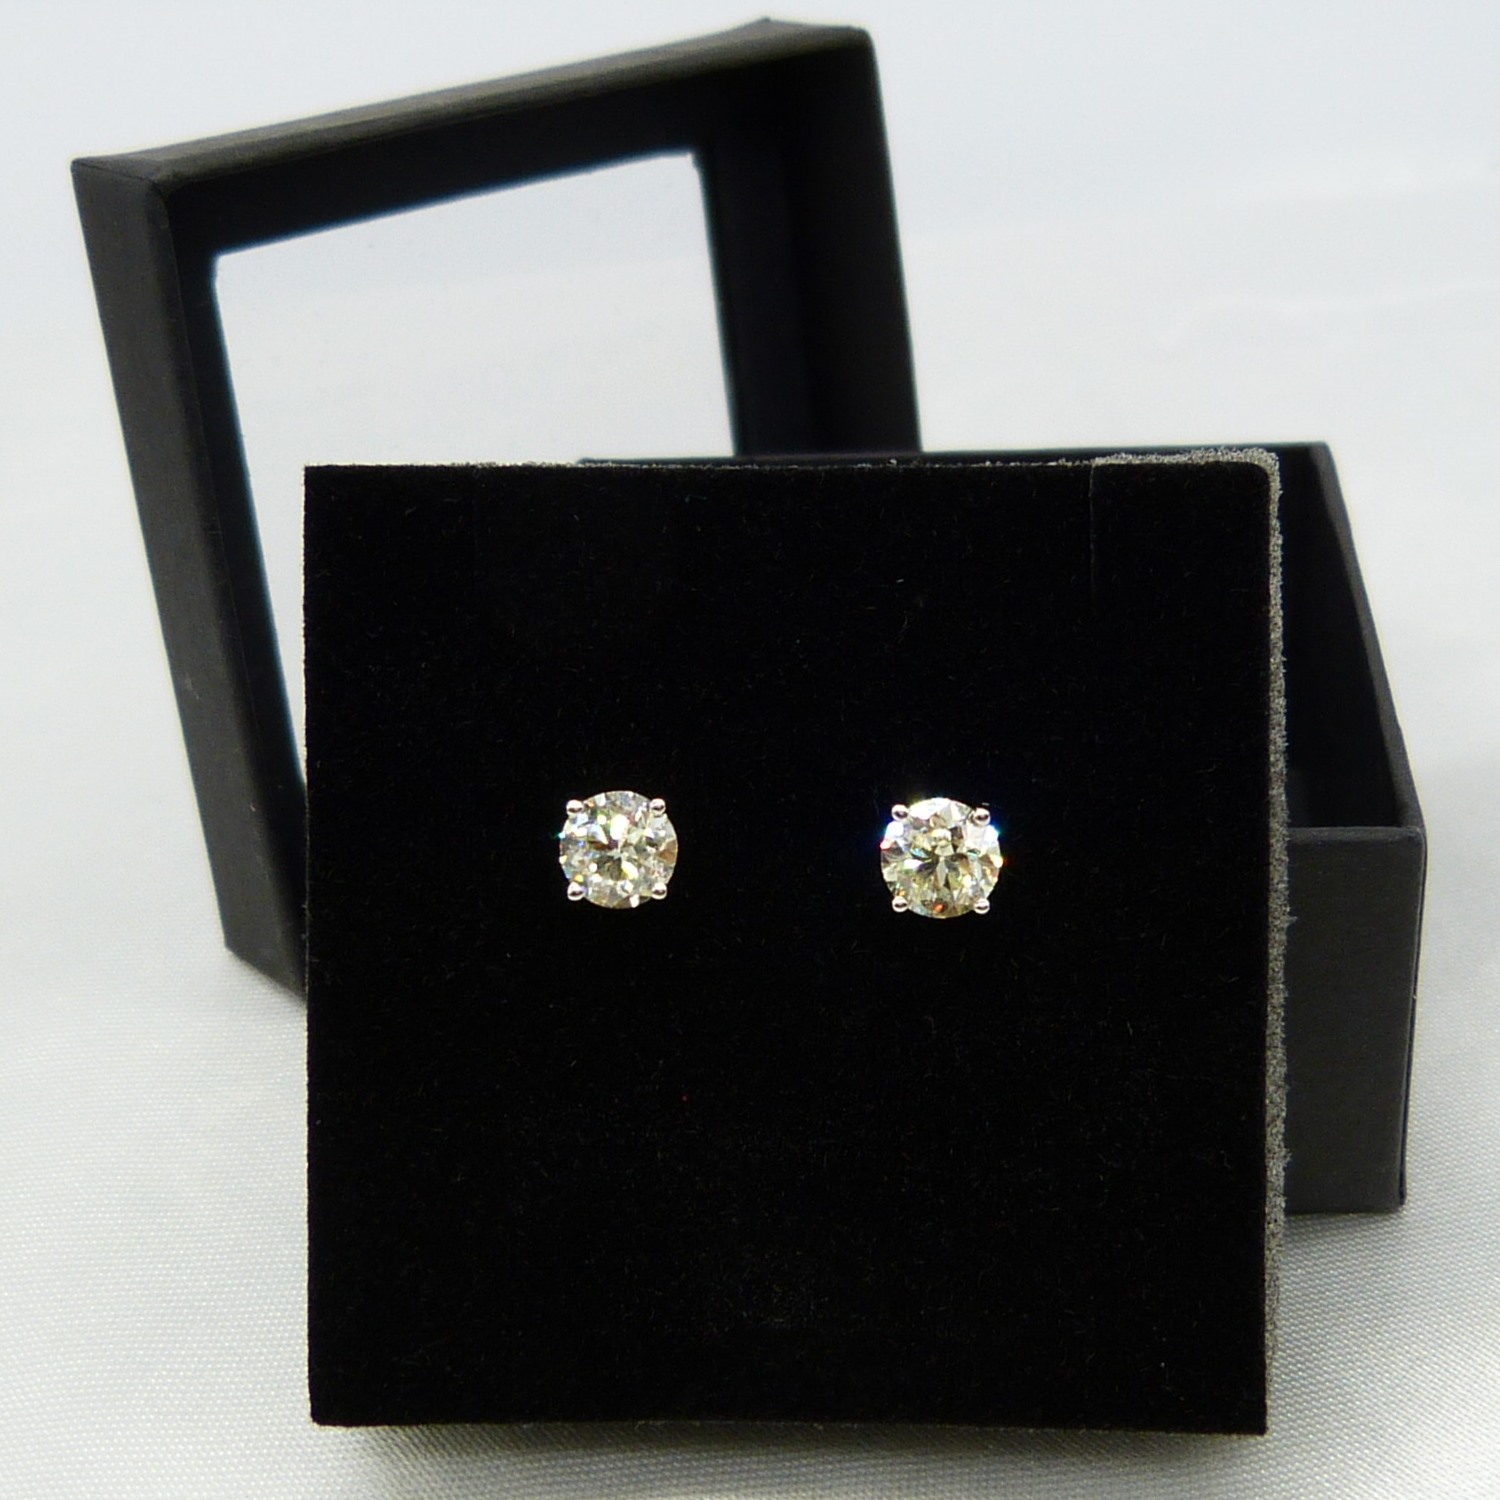 1.32 Carat Diamond Stud Earrings In 18ct White Gold, Certificated and Boxed - Image 8 of 8